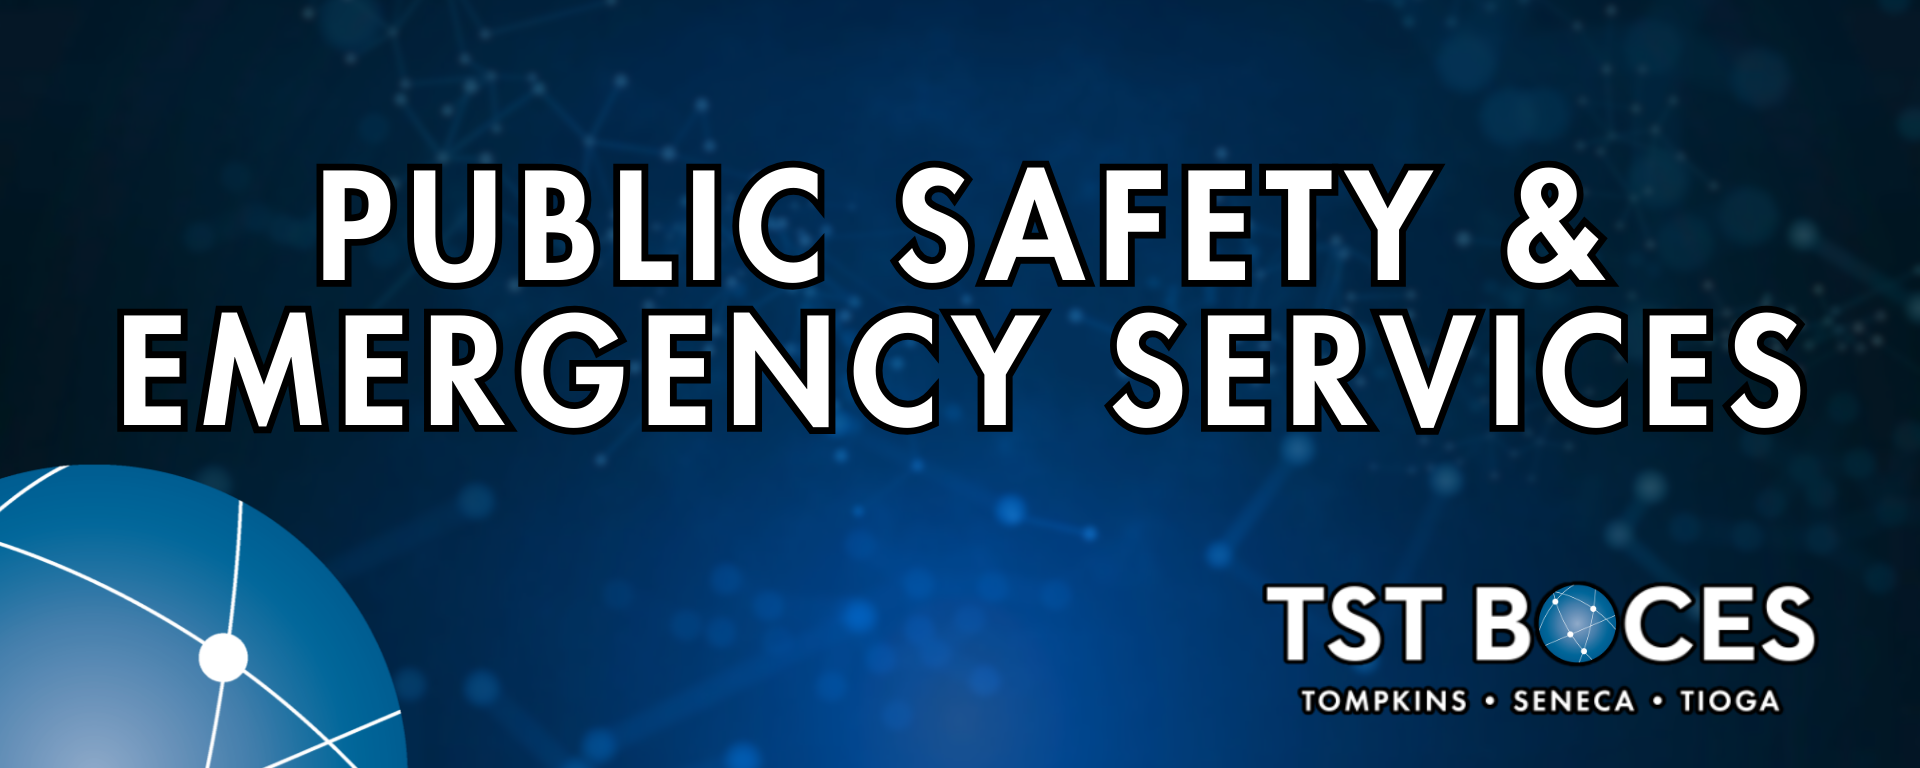 BANNER Public Safety & Emergency Services